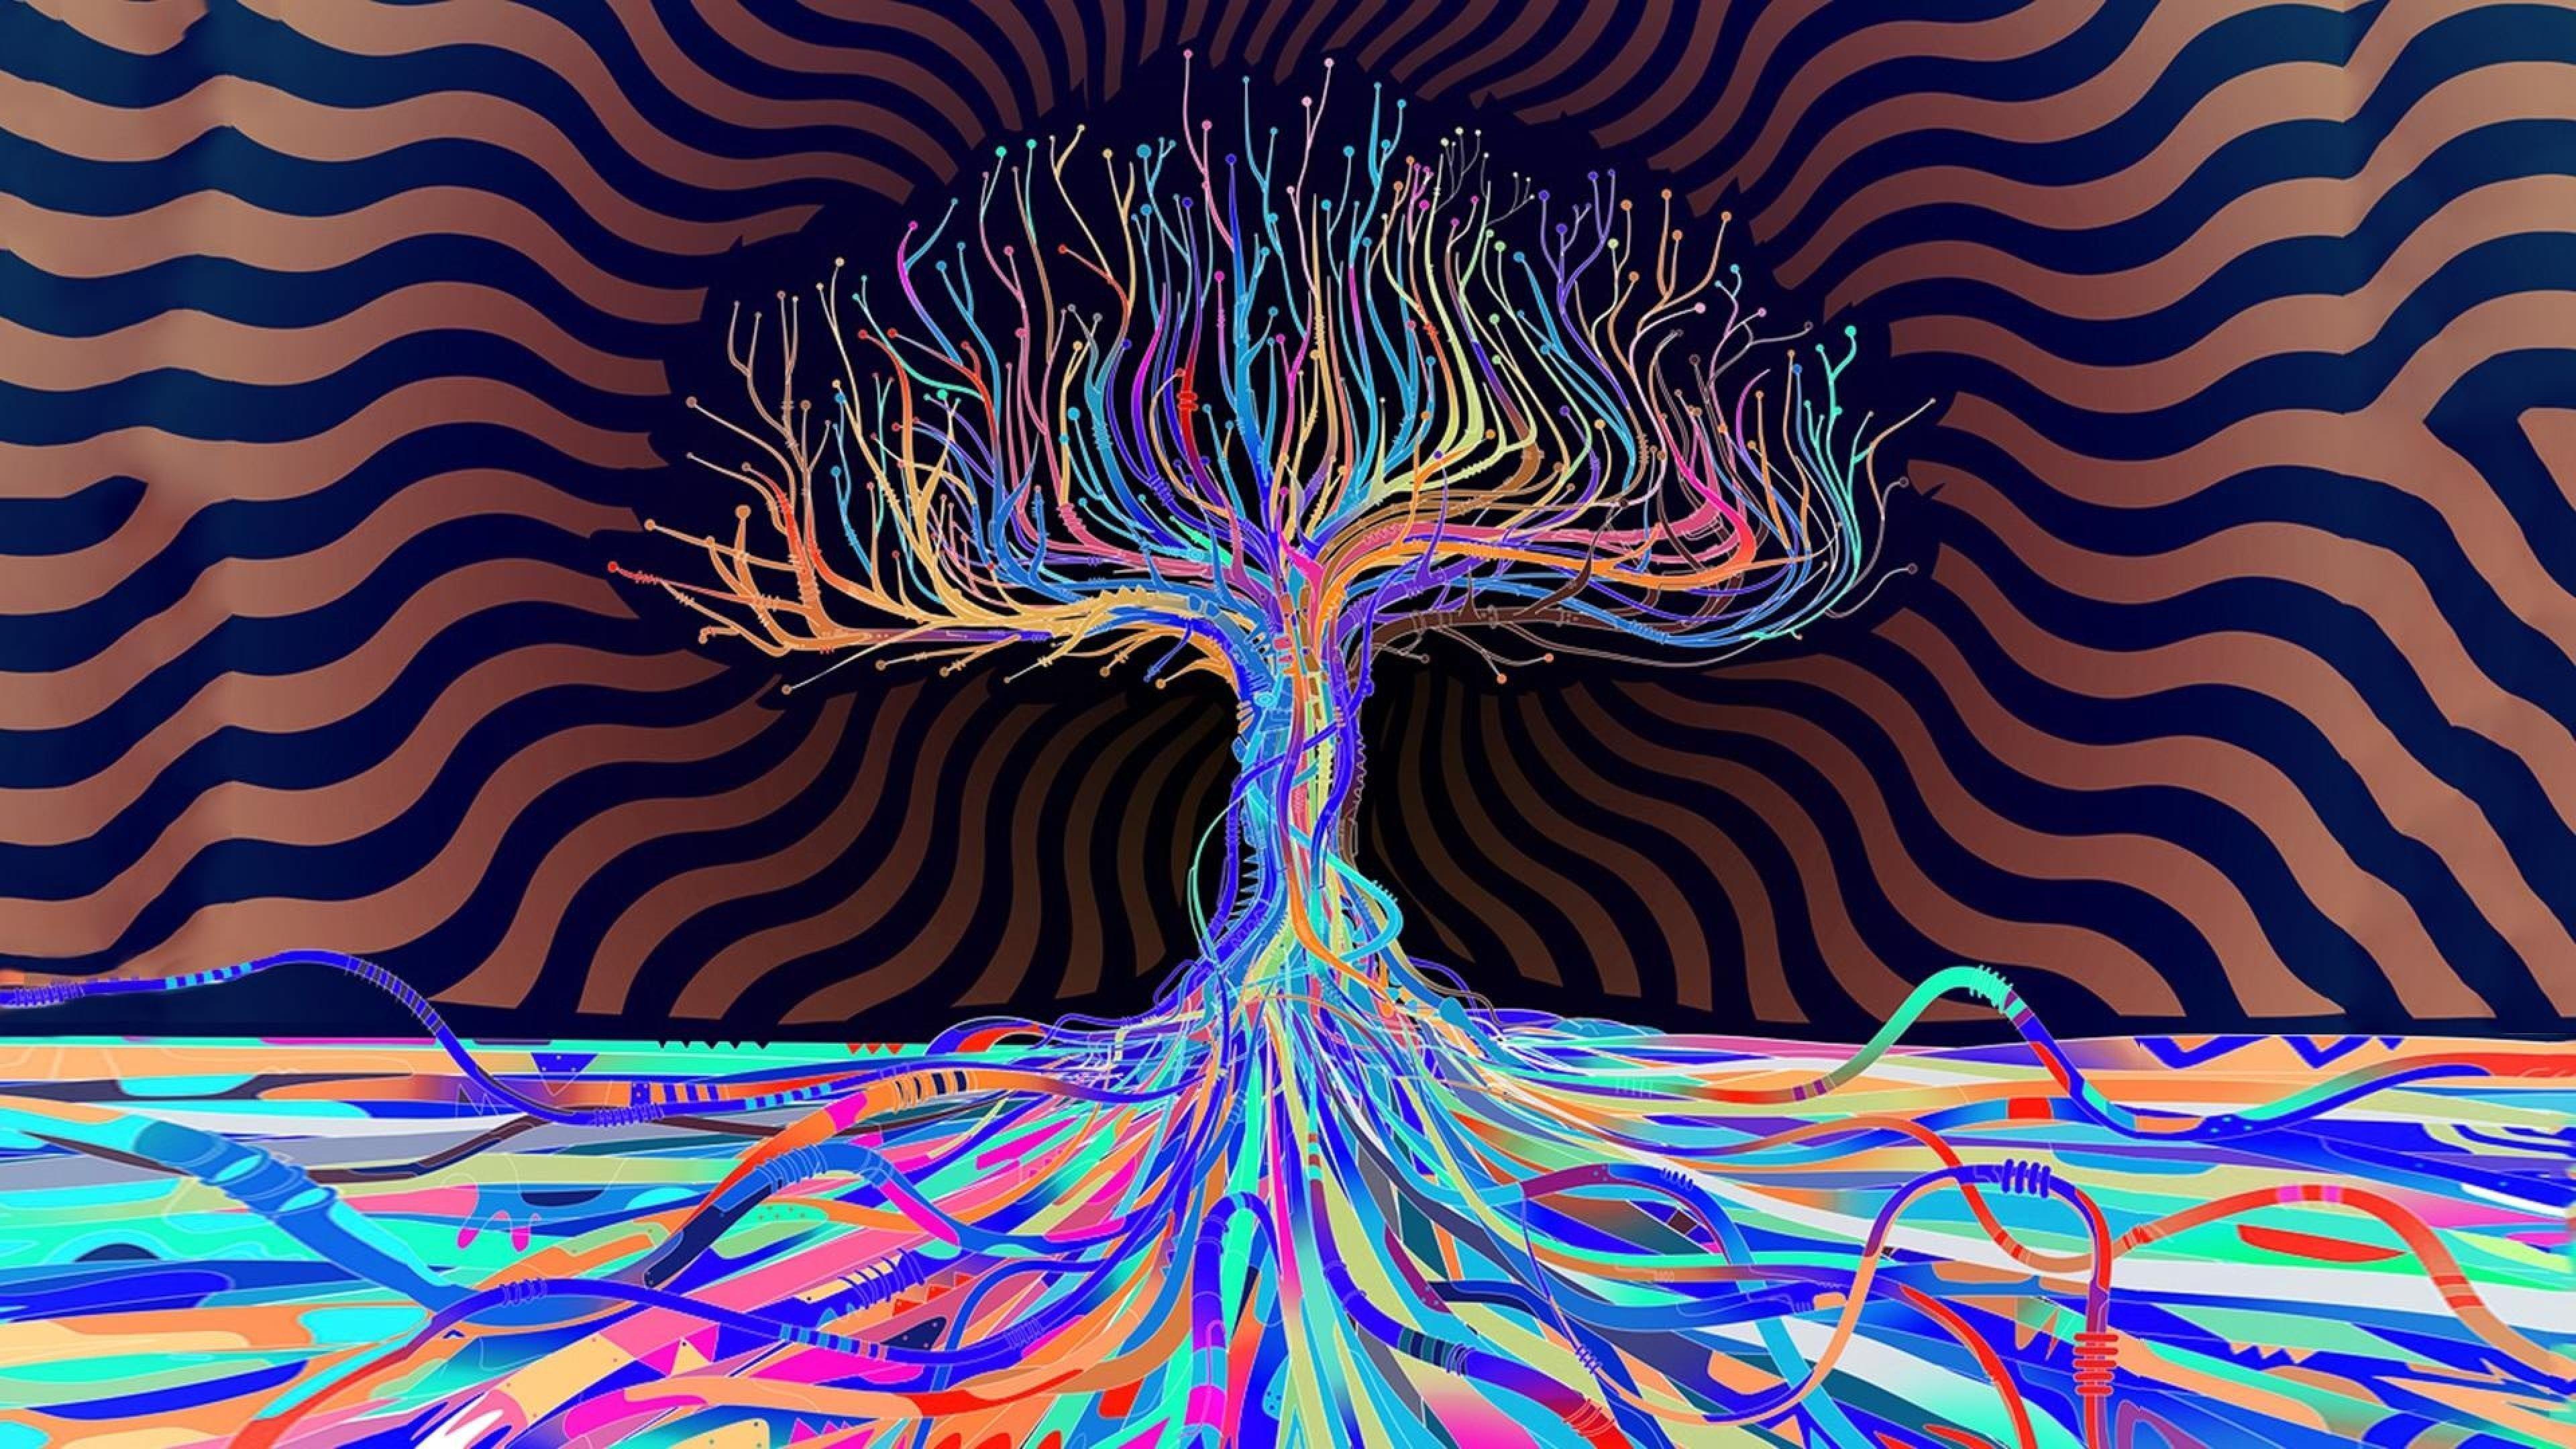 psychedelic colors abstract tree 4k ultra HD wallpaper. Psychedelic